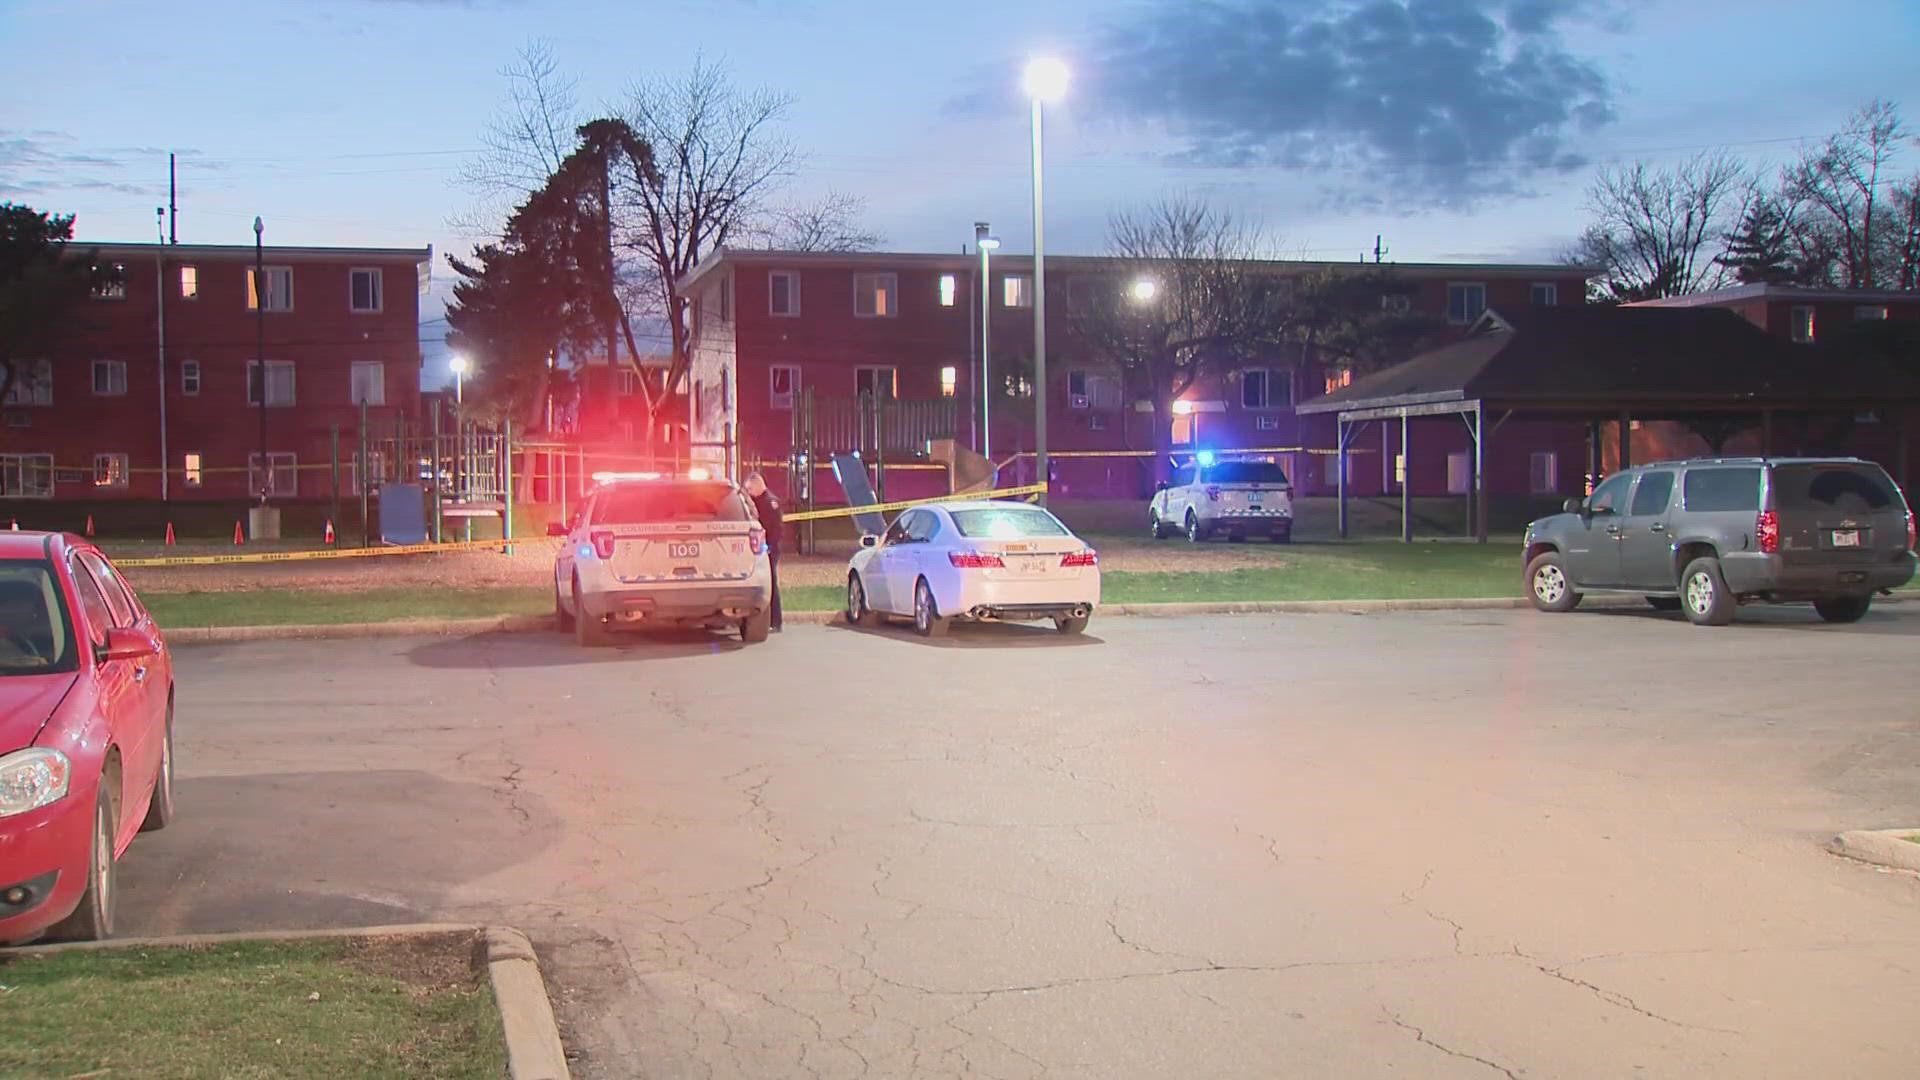 Police said the shooting happened in the 700 block of Wedgewood Drive around 5:40 p.m.